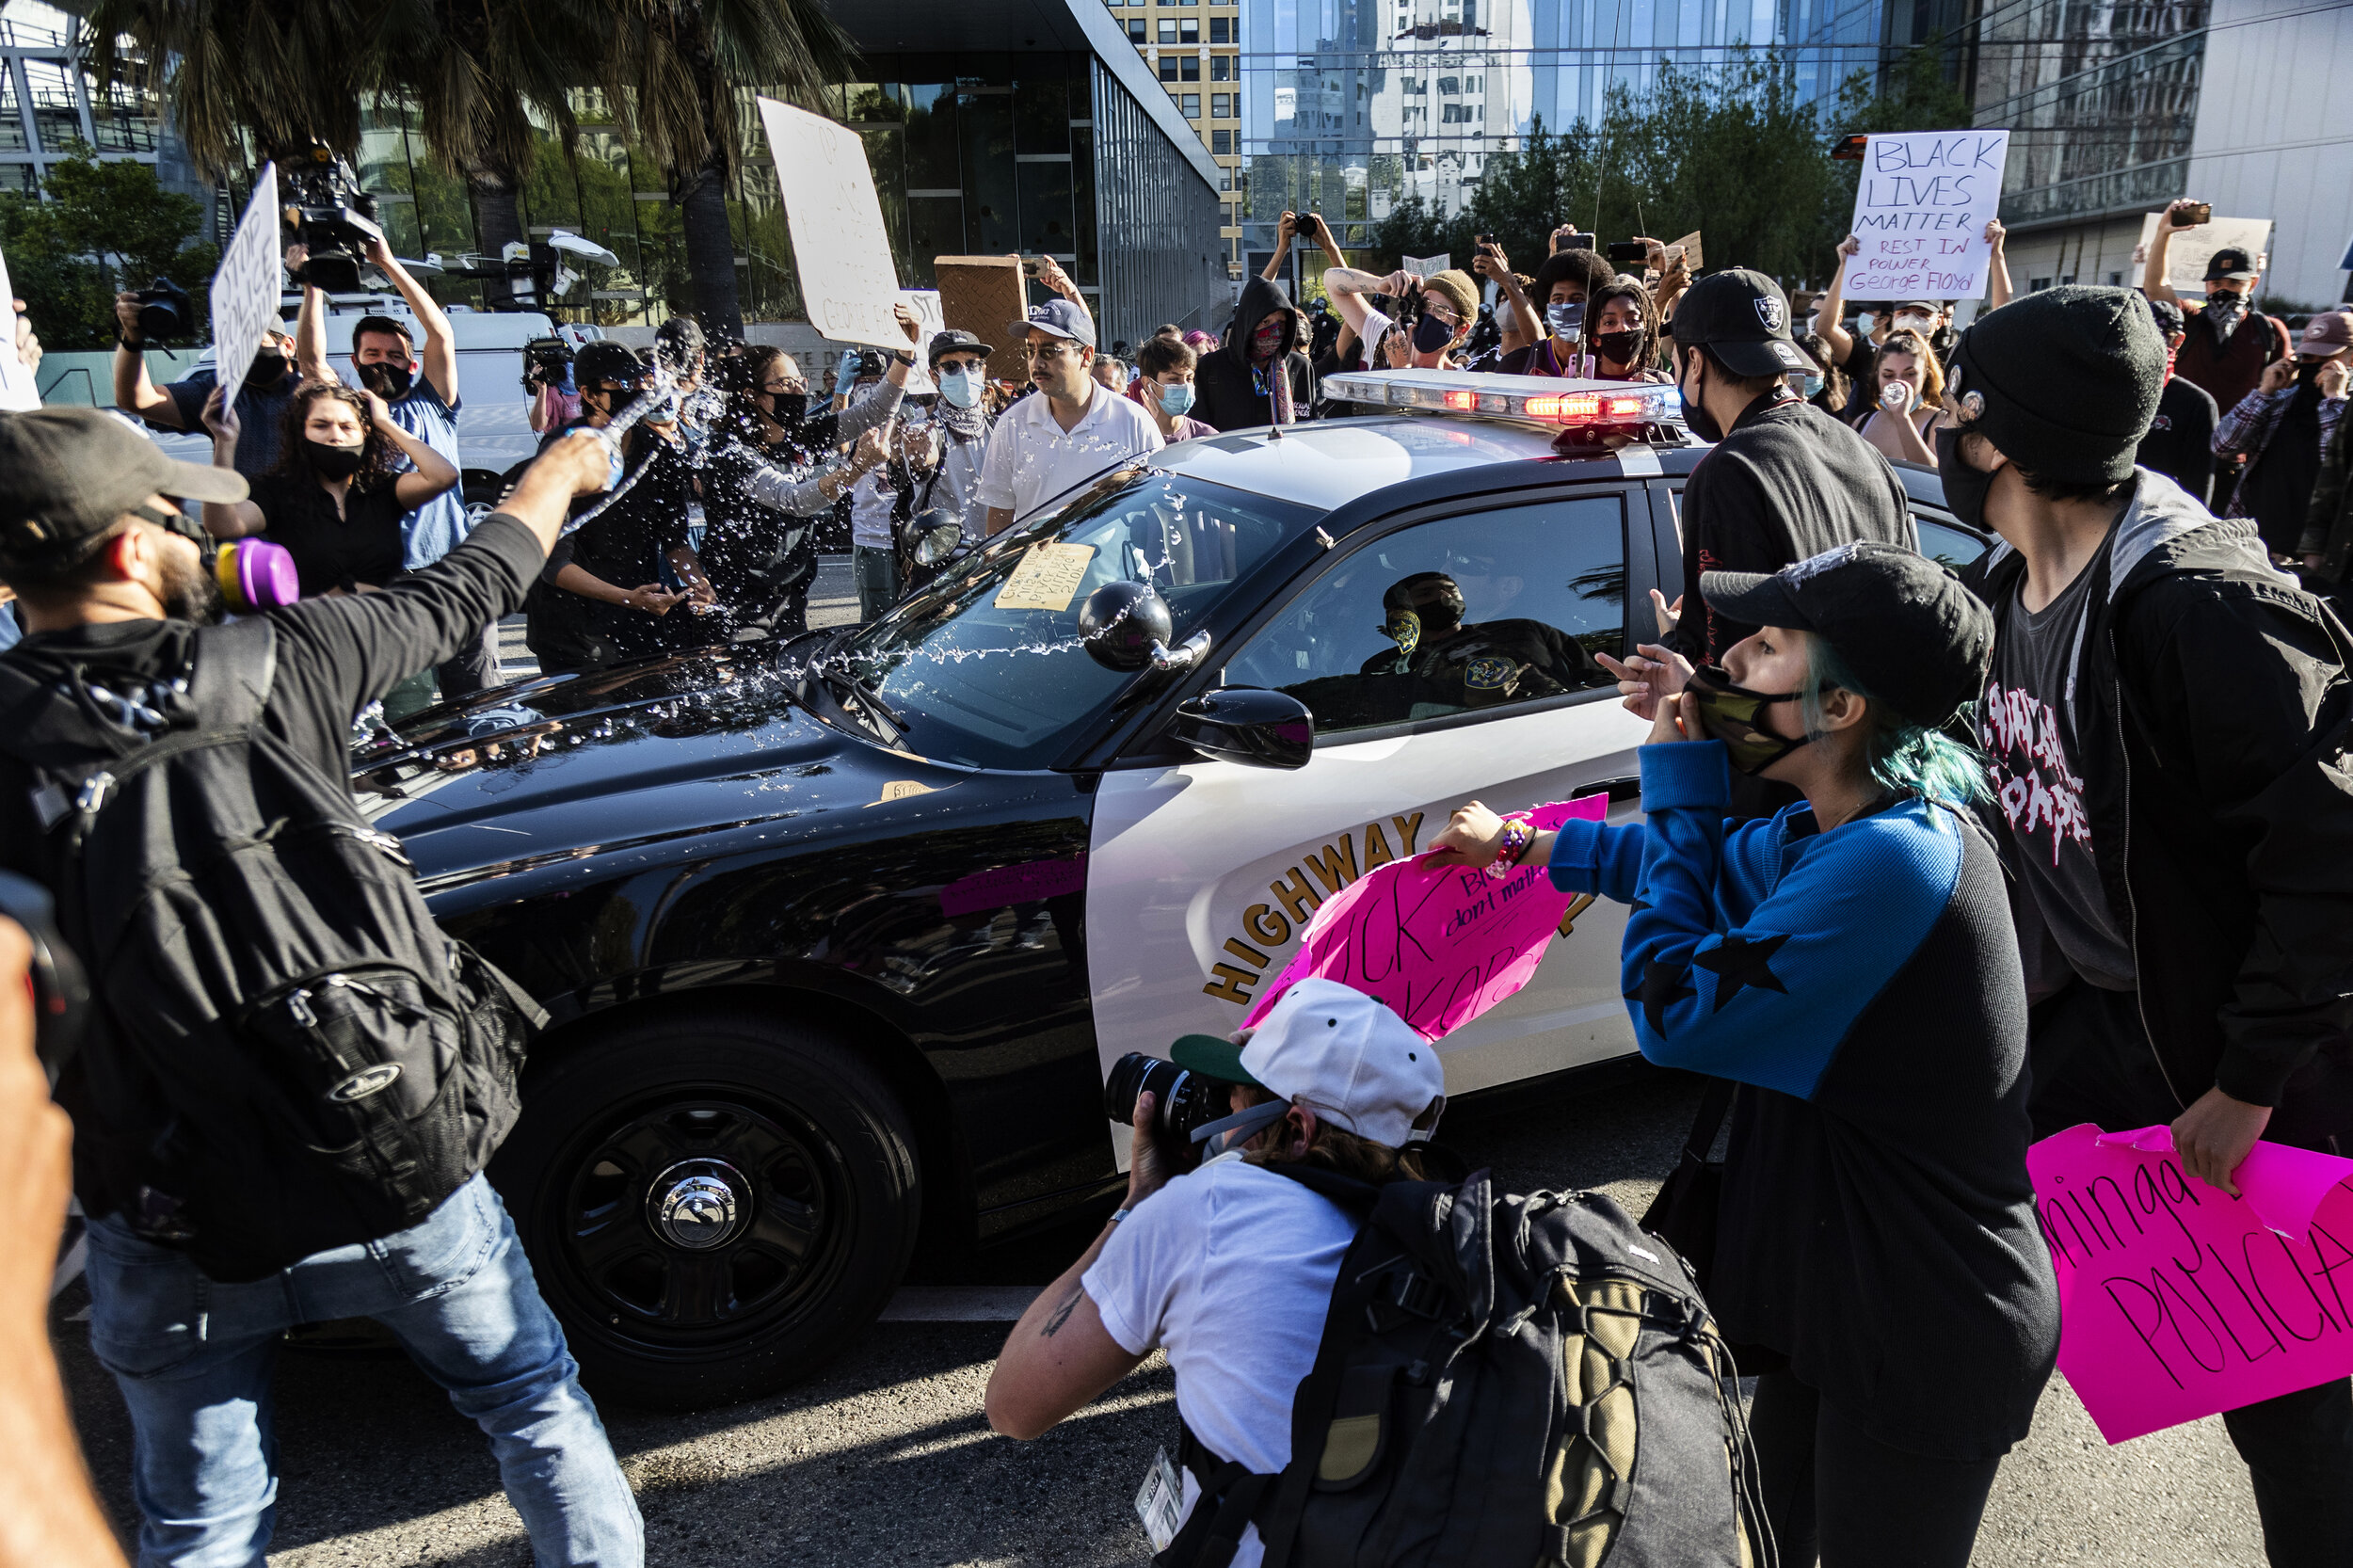  LOS ANGELES, CA - MAY 28, 2020: A protester tosses a bottled water on a CHP vehicle as other Black Lives Matter protesters swarm the car in a rally in front of LAPD headquarters to protest the death of George Floyd during the coronavirus pandemic on